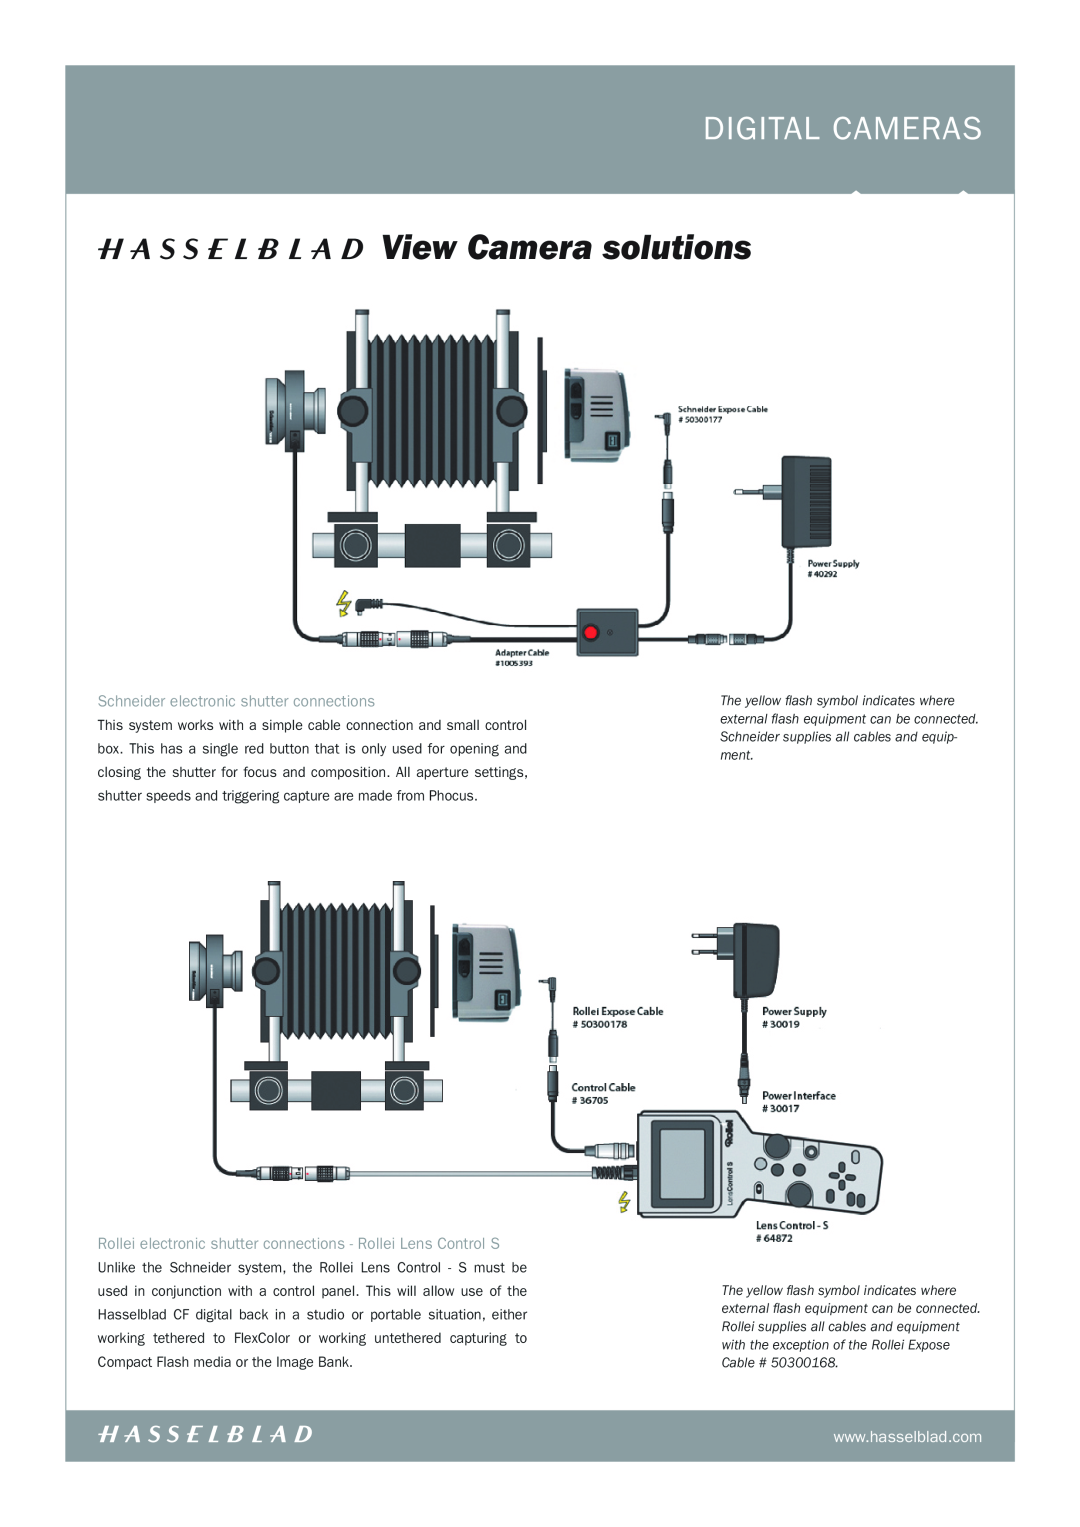 Hasselblad H3DII Schneider electronic shutter connections, Rollei electronic shutter connections - Rollei Lens Control S 